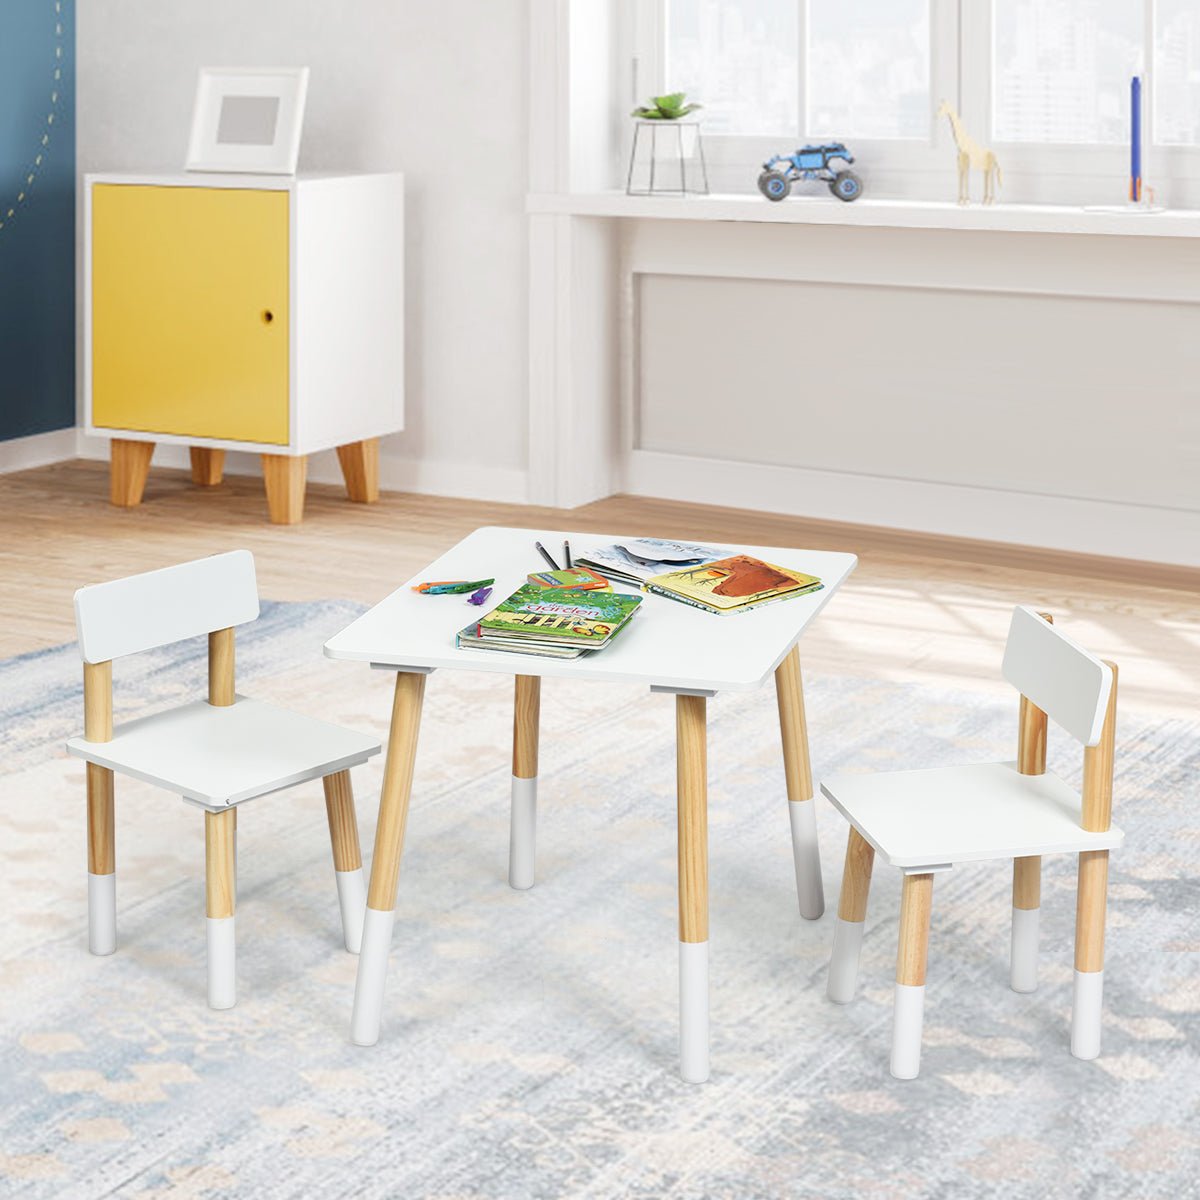 Children's Table & Chairs Set: Pine Wood Legs for Play, Learning & Meals